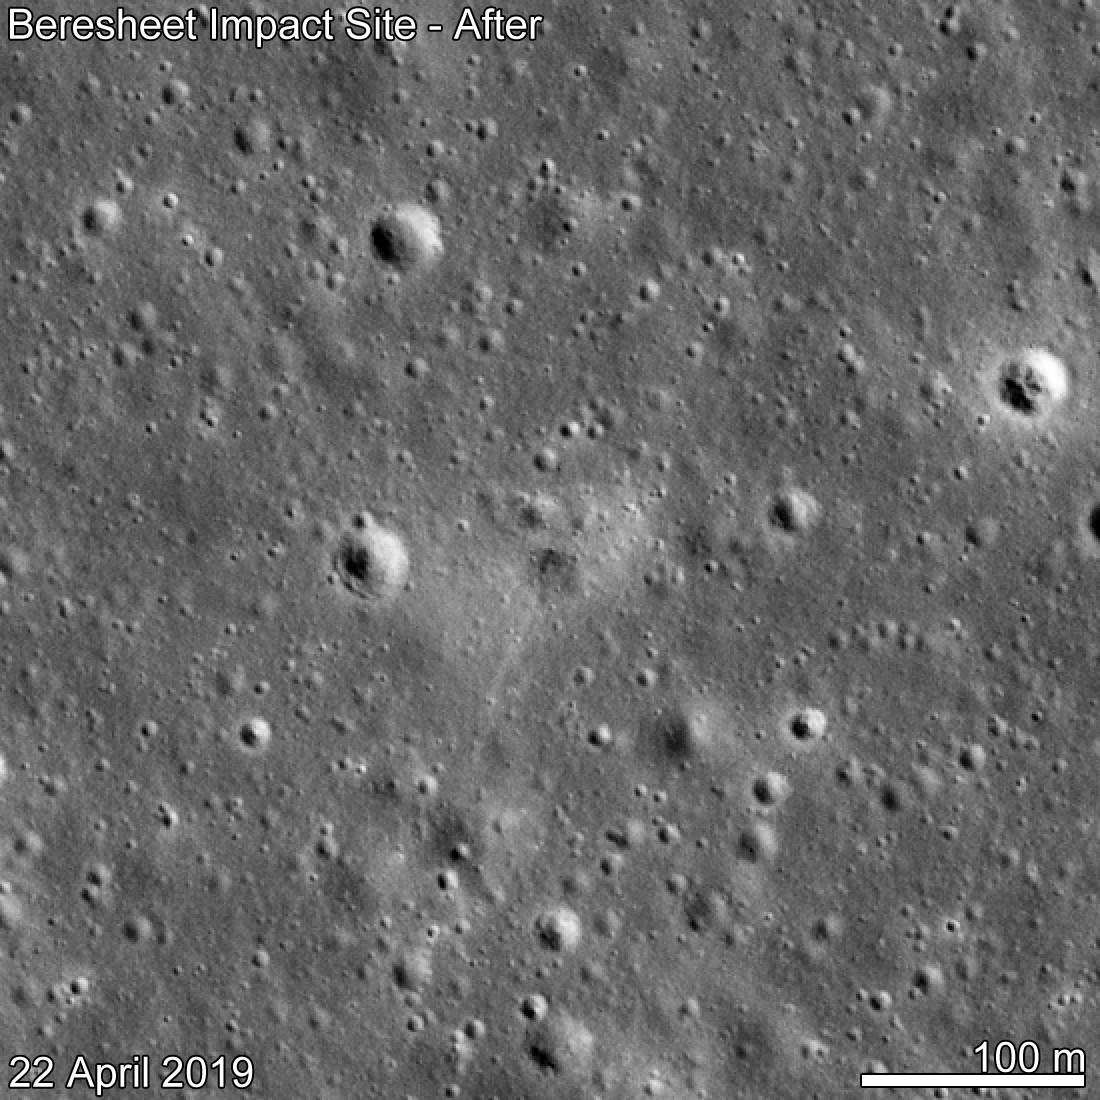 Figure 12: Before and after comparison of the landing site. Date in lower left indicates when the image was taken. It appears the spacecraft landed from the north on the rim of a small crater, about a few meters wide, leaving a dark "smudge" on Mare Serenitatis that's elongated towards the south (image credit: NASA/GSFC/Arizona State University)